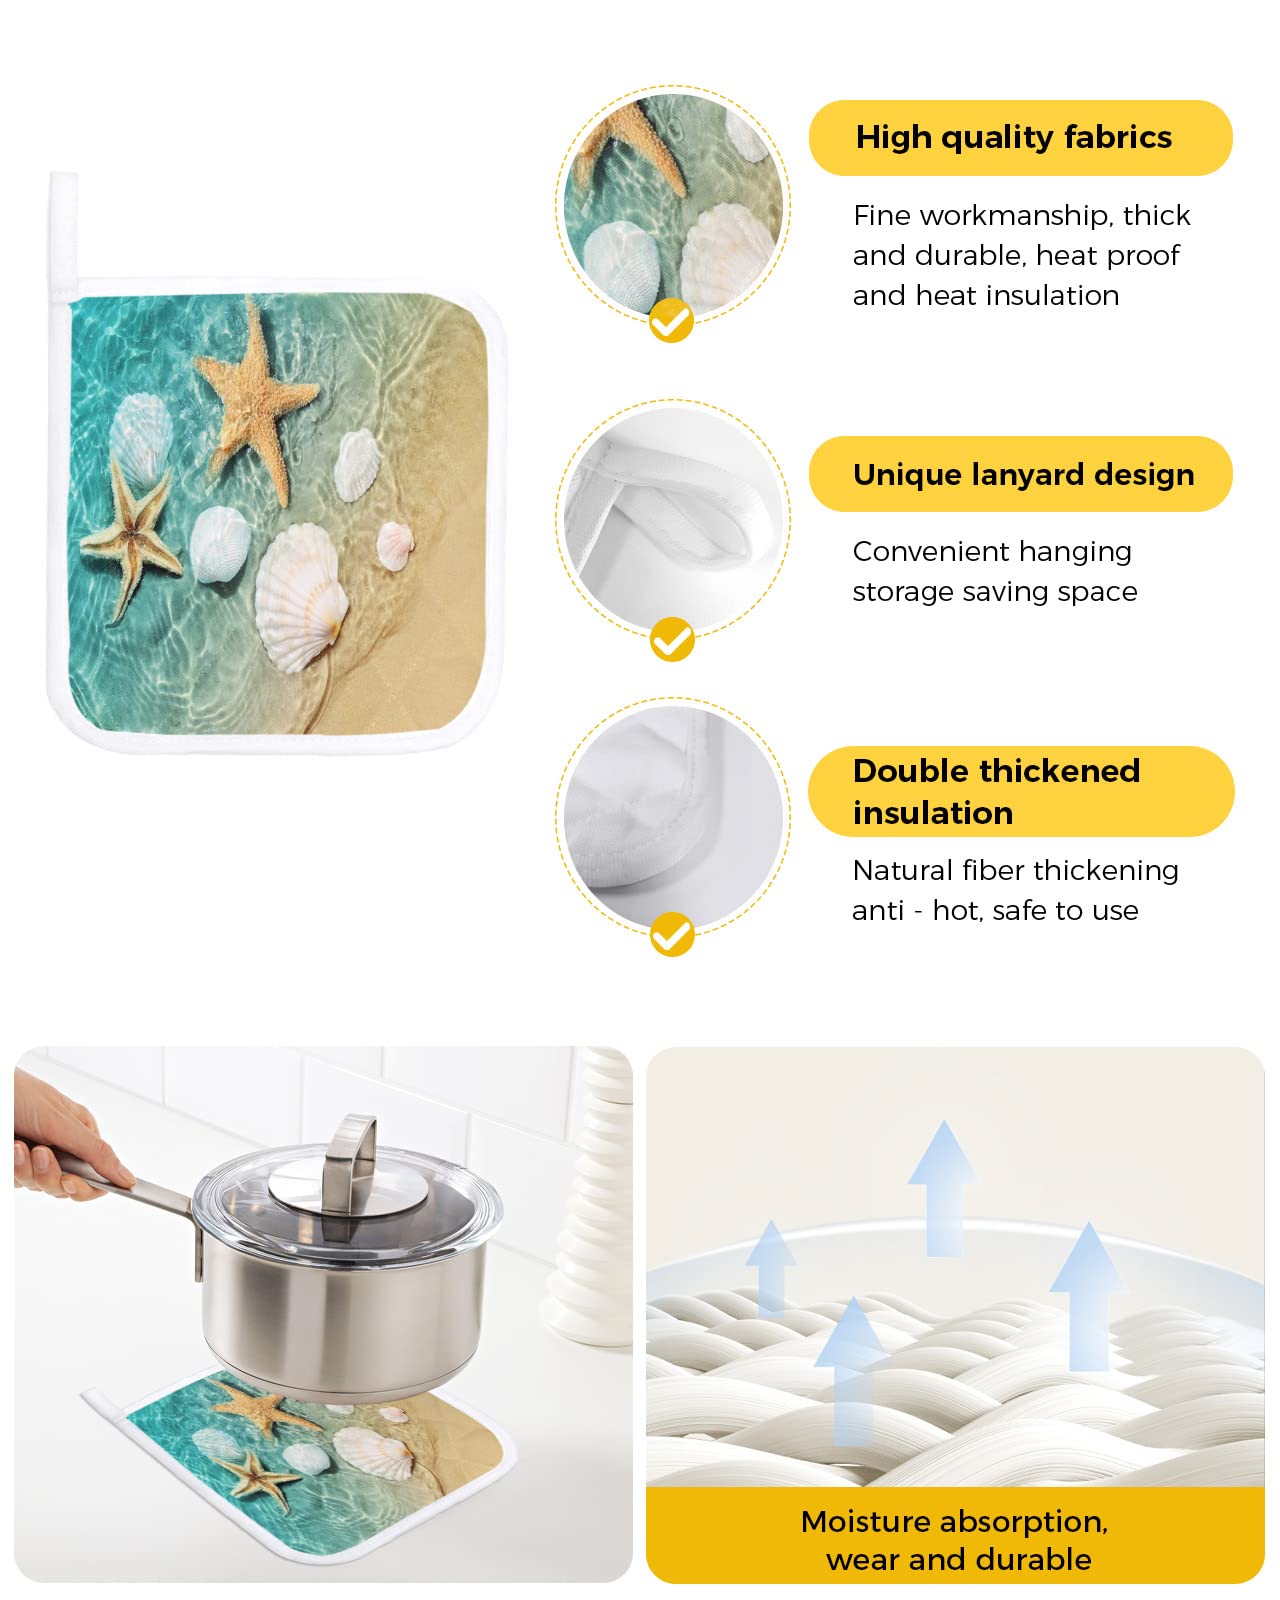 4 Pack Pot Holders Heat Insulation Hot Pads, Ocean Starfish Coastal Shell Washable Oven Pot Holder Set for Kitchen Summer Sea Beach Potholders for Baking Cooking Dining Table